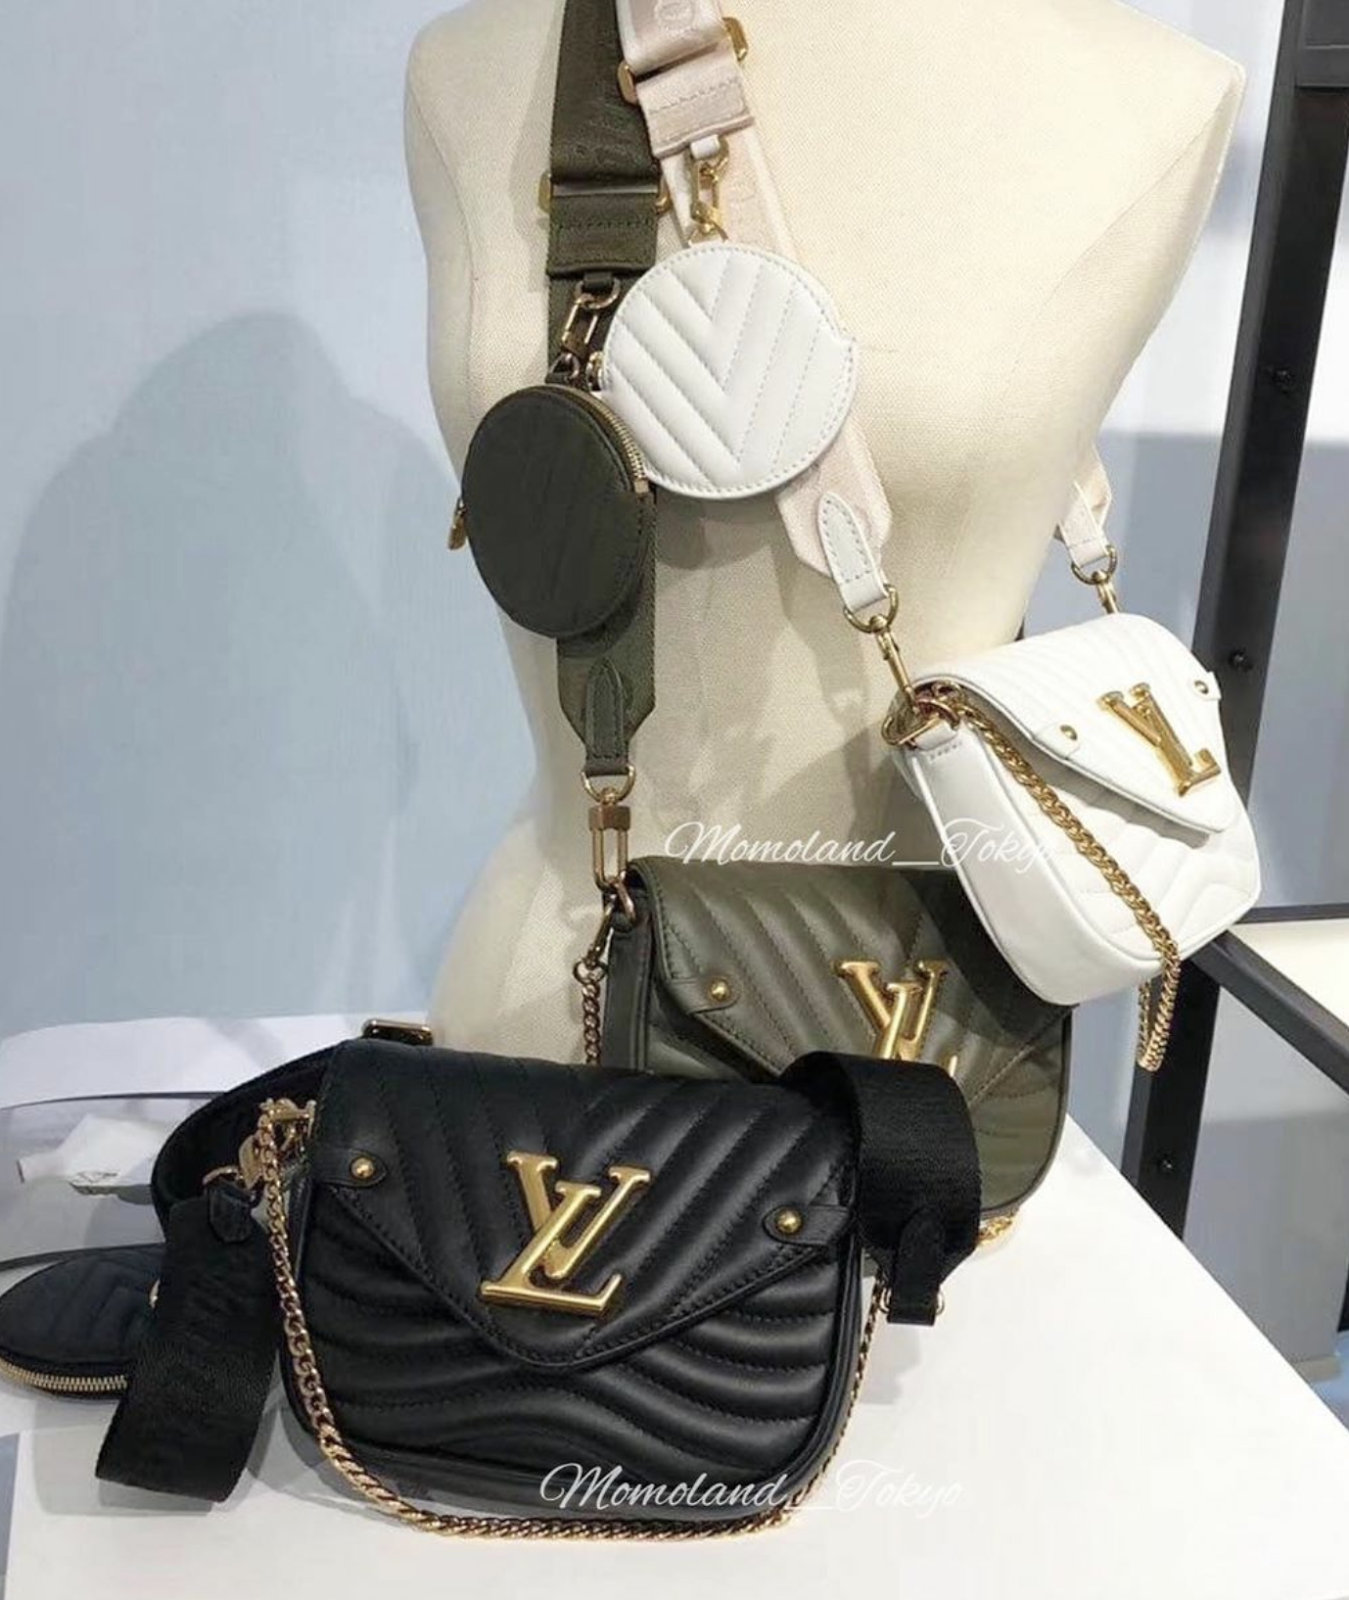 Louis Vuitton's New Wave Bags are a Surprising New Direction for